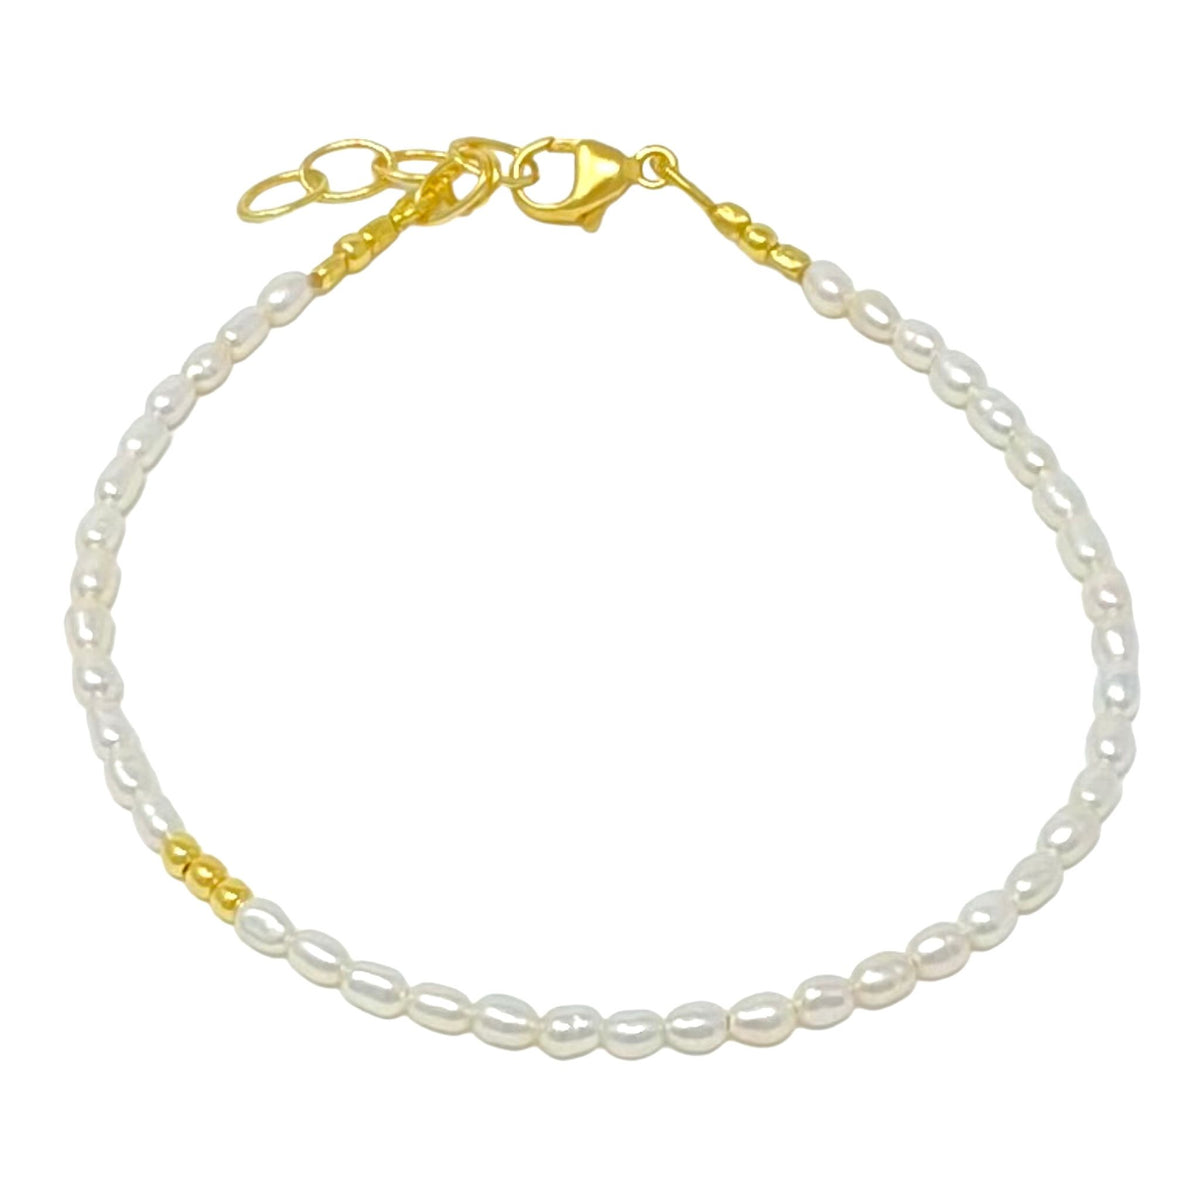 Delicate freshwater pearl bracelet with gold vermeil beads